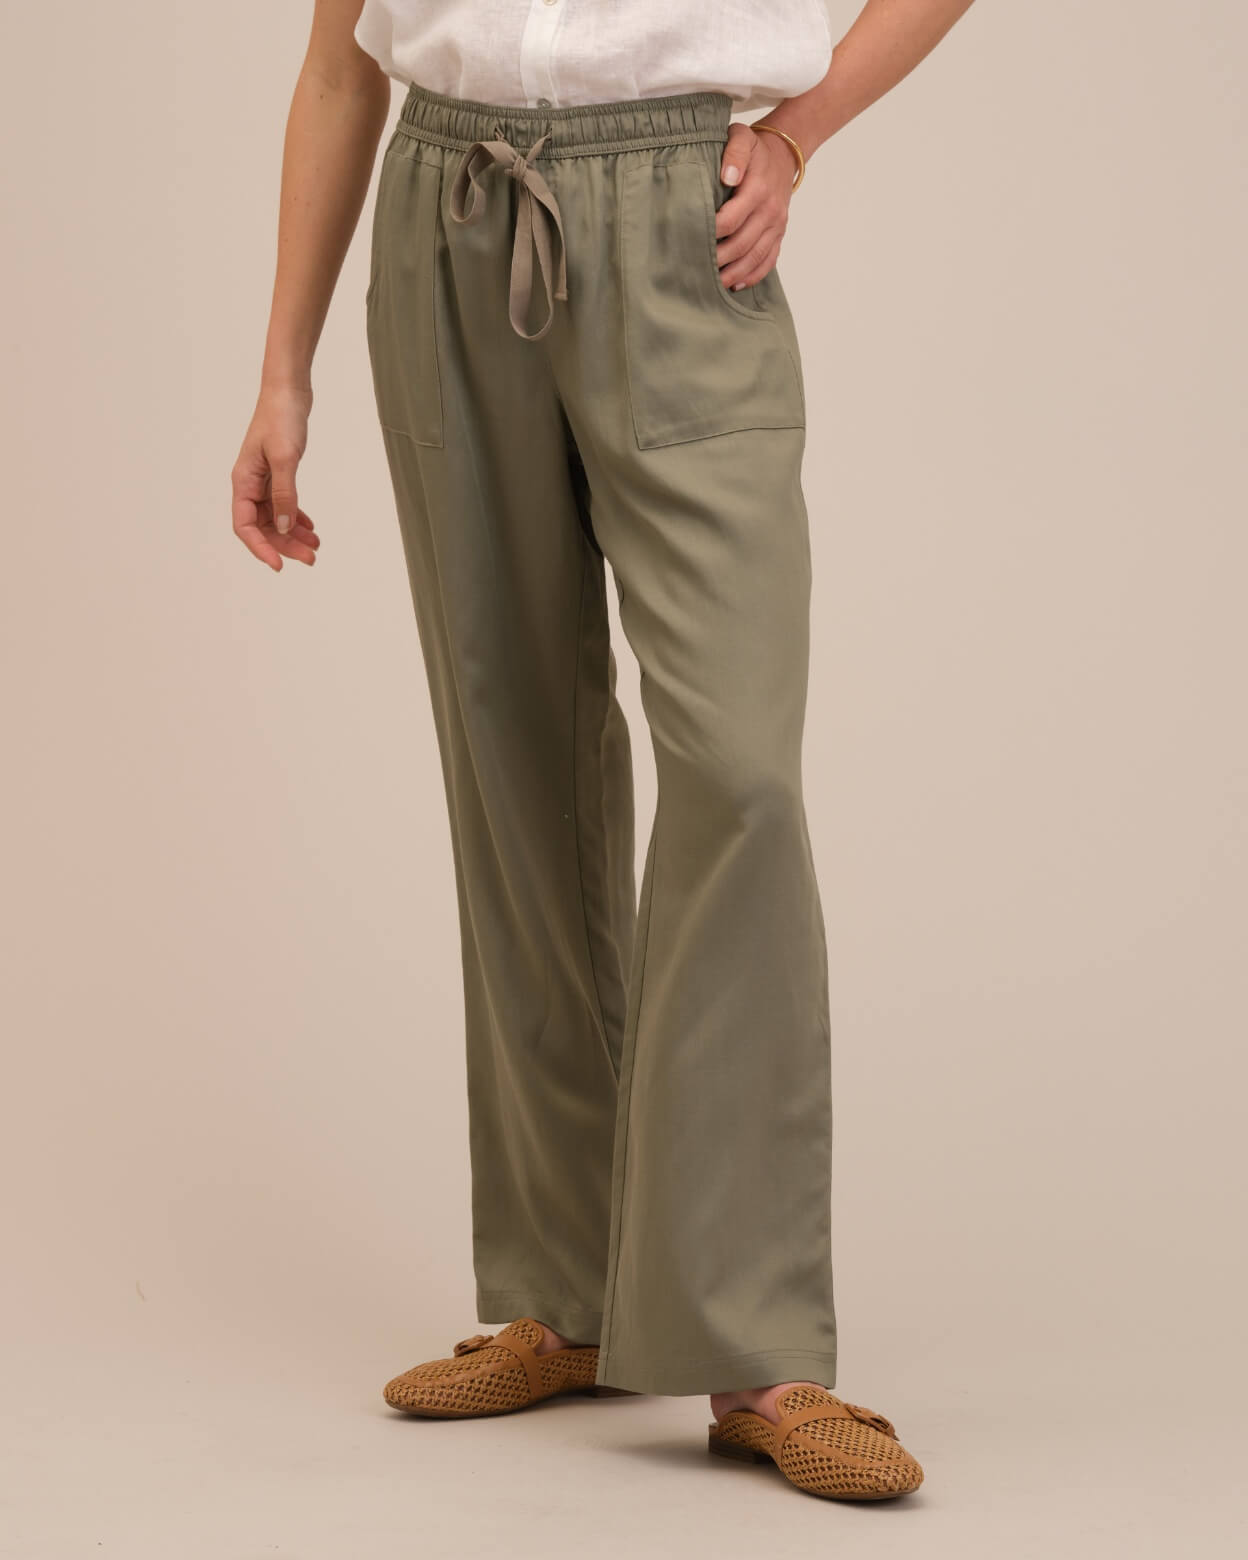 Buy Linen Woman's Pants KAIA, Linen Drawstring Pants in Crop Length With  Side Pockets, Linen High Waist Pants for Woman Online in India - Etsy